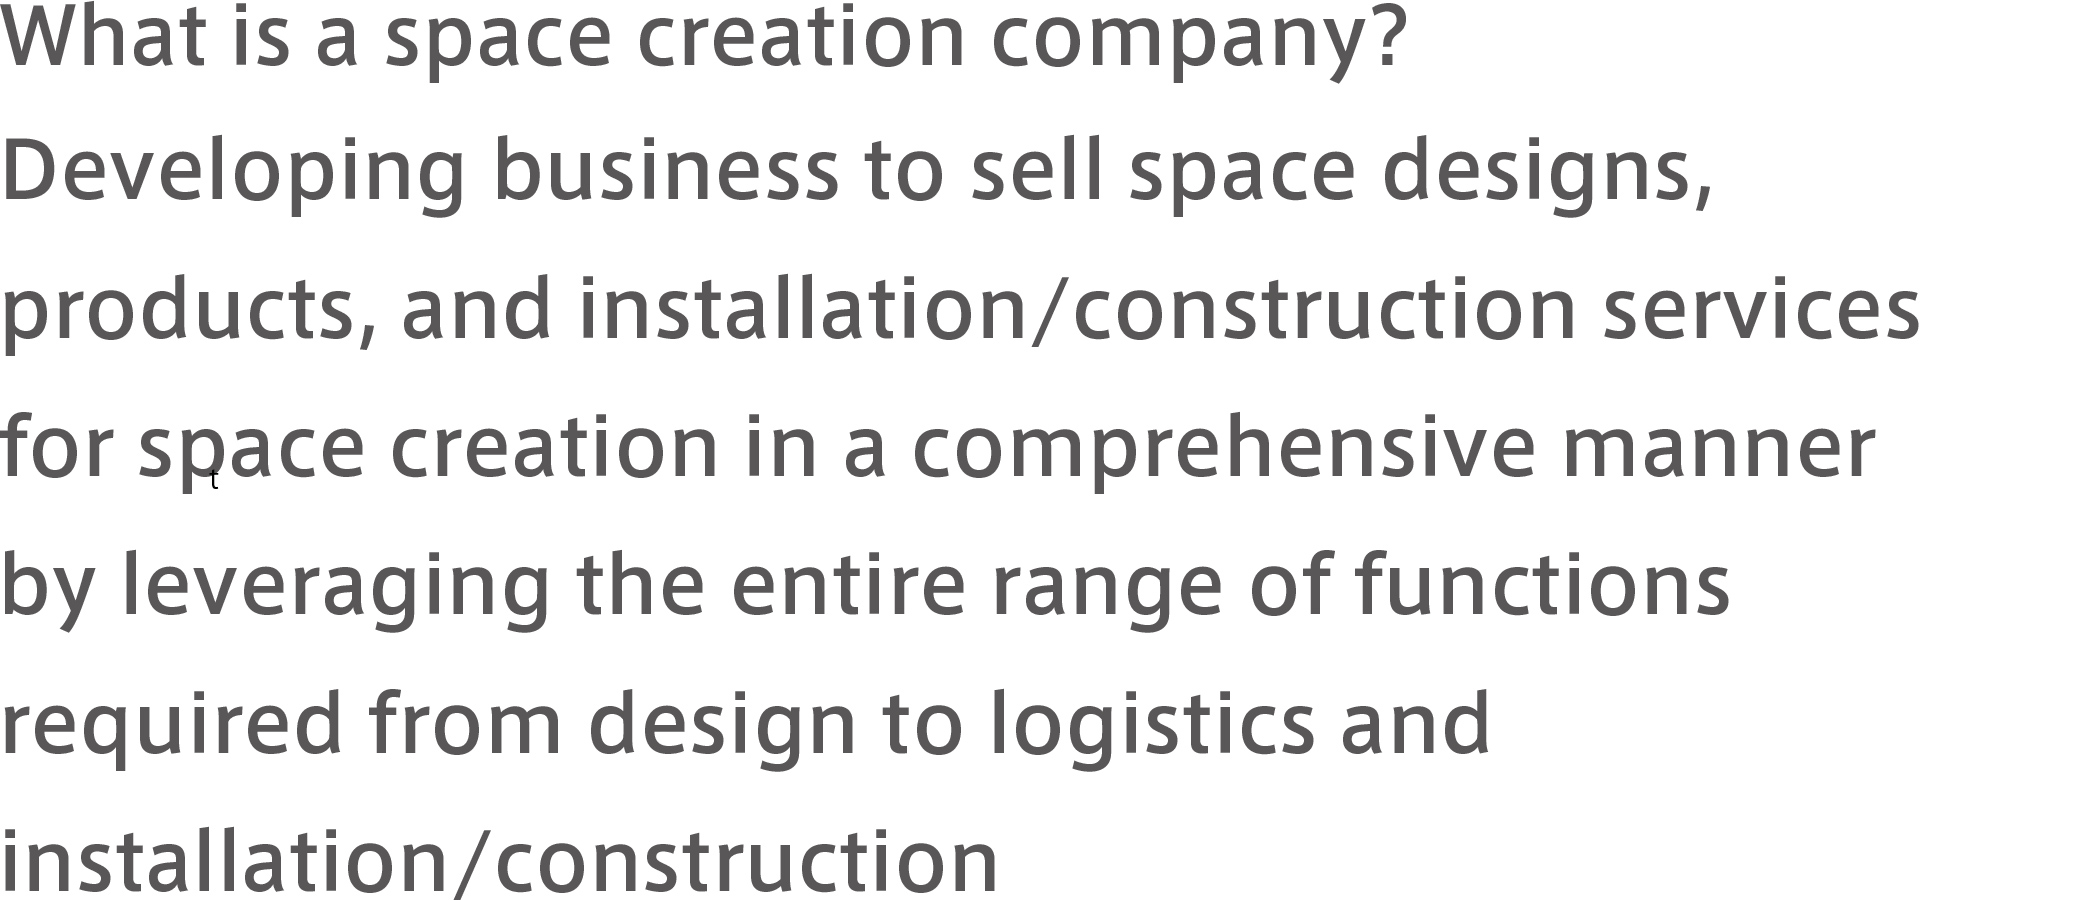 What is a space creation company? Developing business to sell space designs, products, and installation/construction services for space creation in a comprehensive manner by leveraging the entire range of functions required from design to logistics and installation/construction